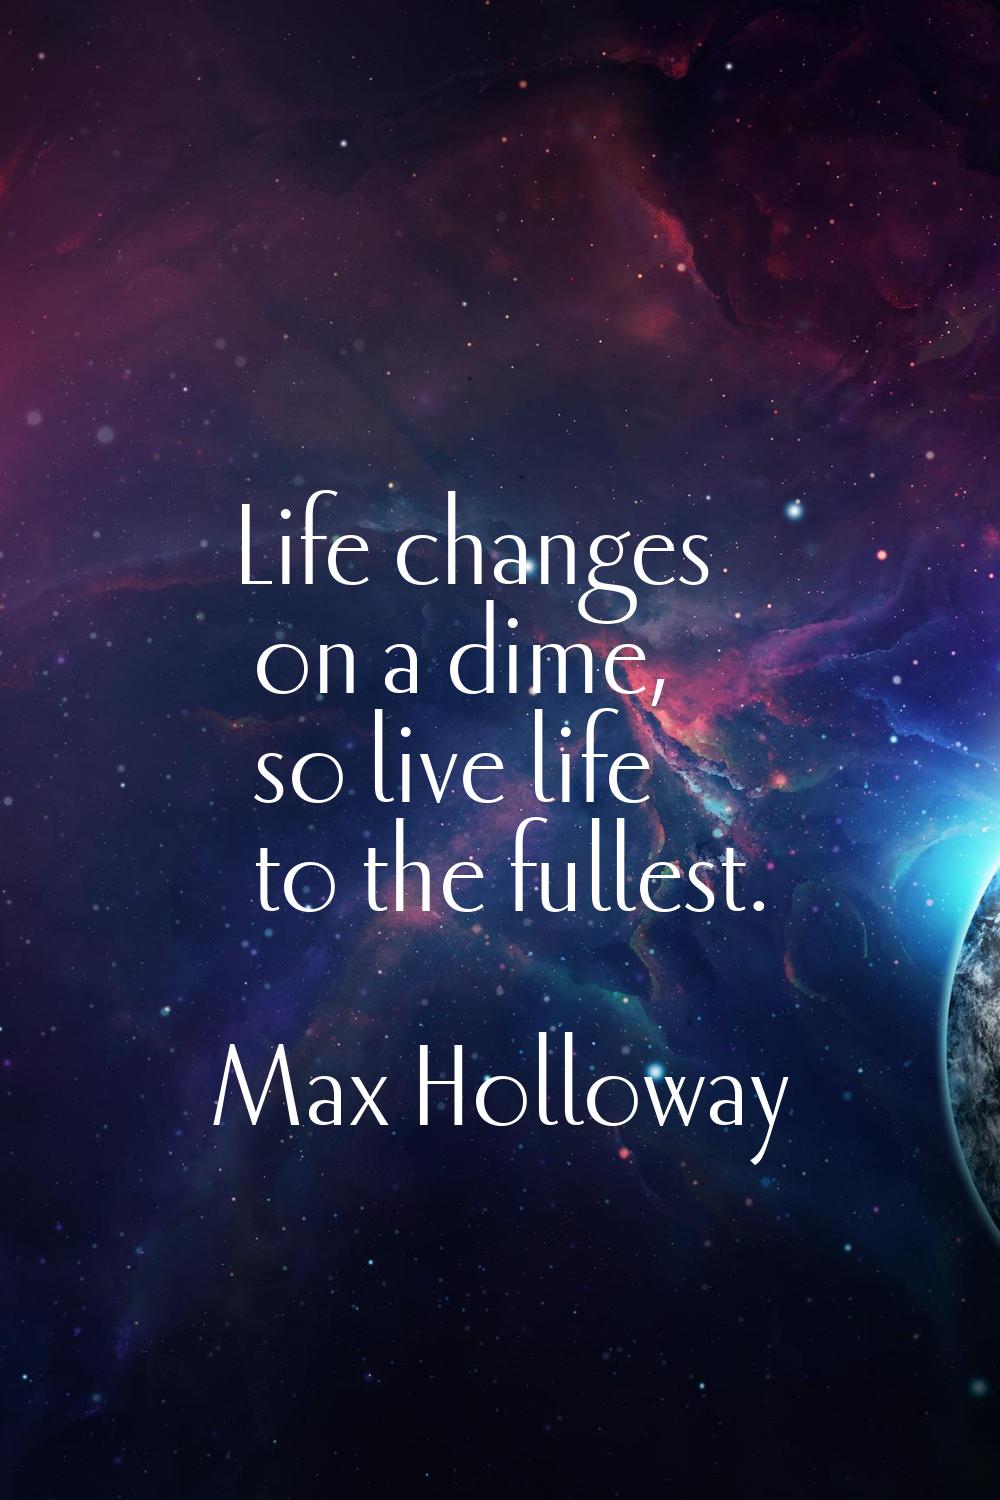 Life changes on a dime, so live life to the fullest.